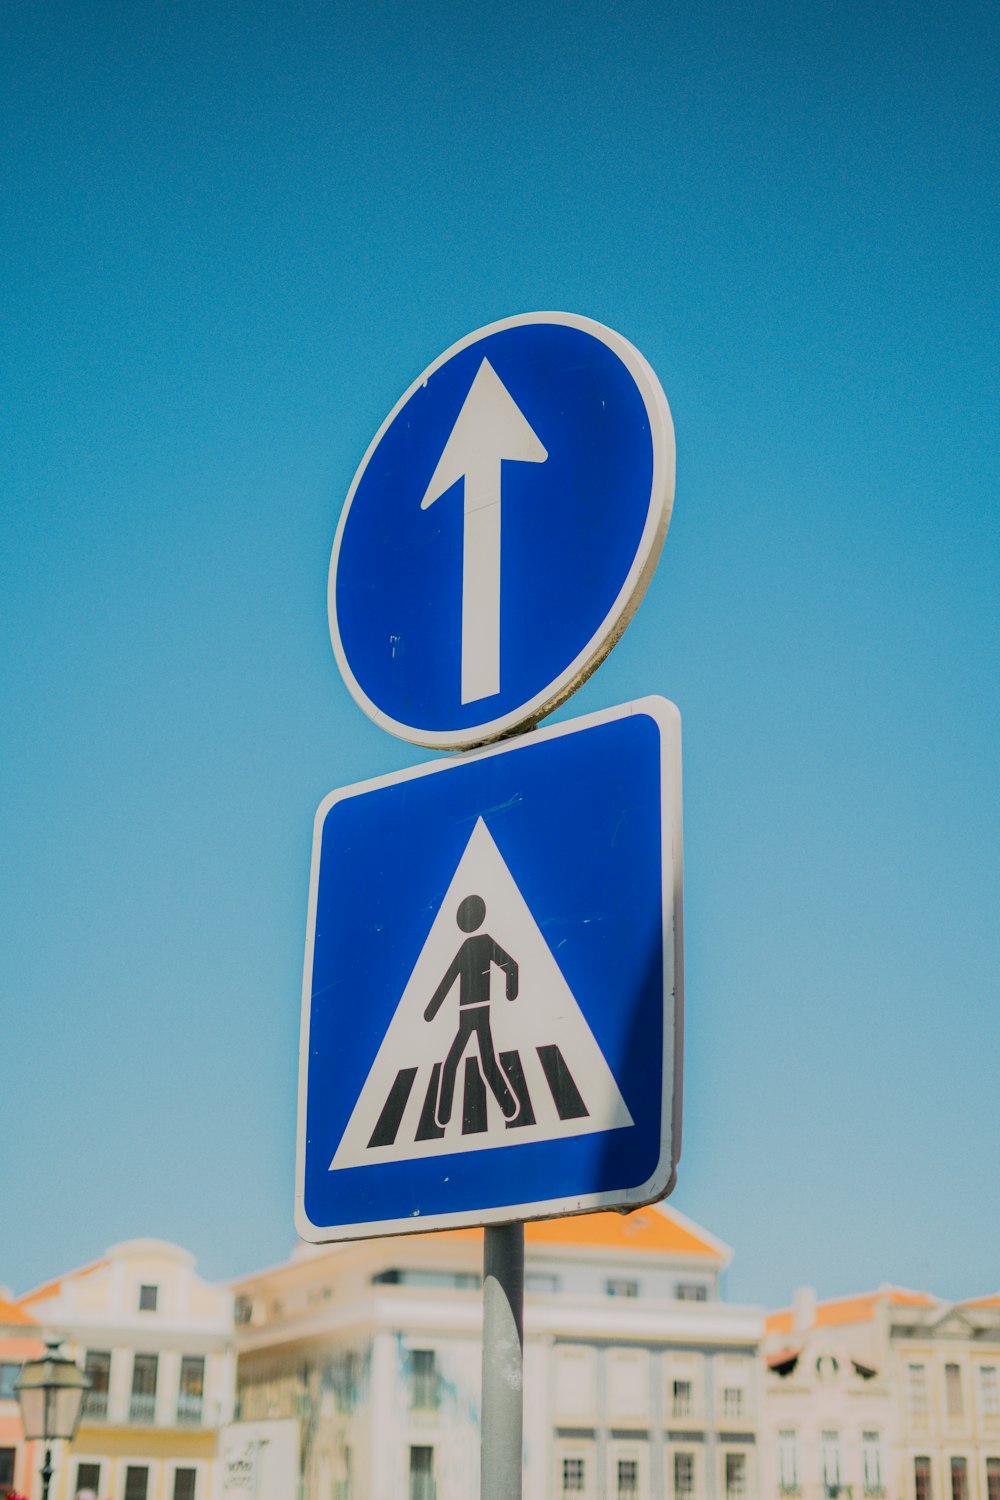 a blue and white street sign with an arrow pointing to the left